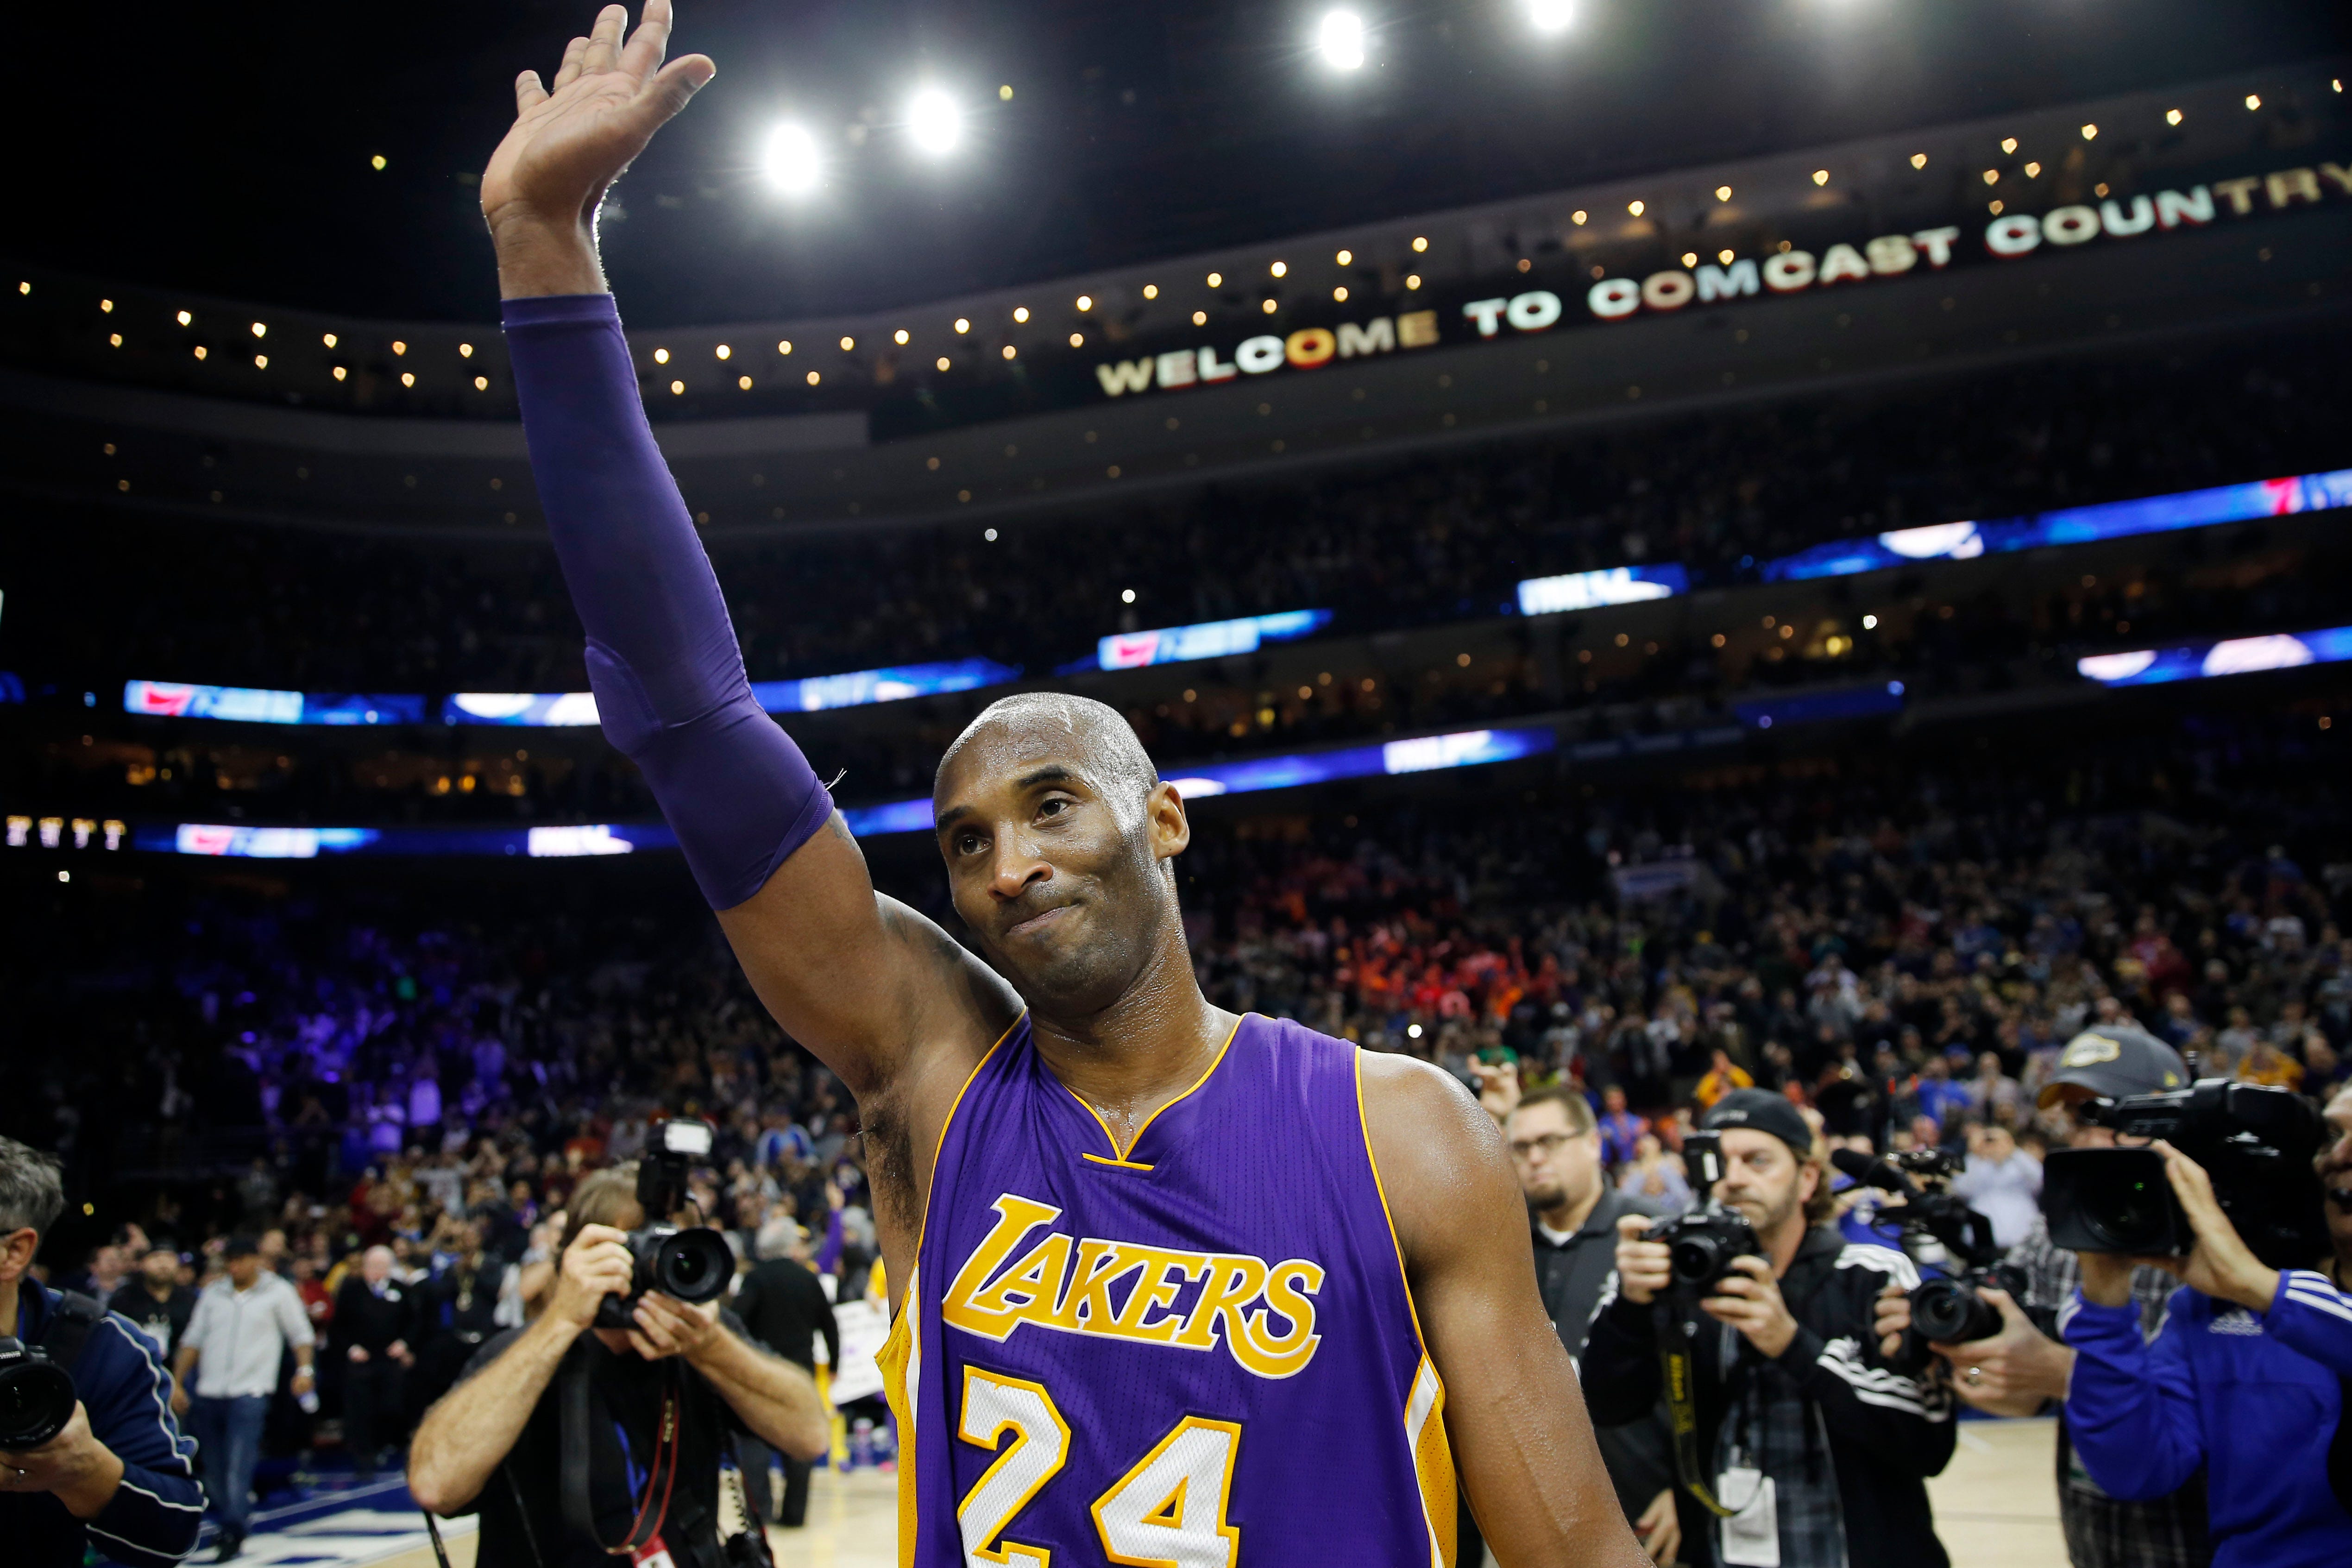 Kobe Bryant waves to the crowd after an NBA game in Philadelphia in 2015.